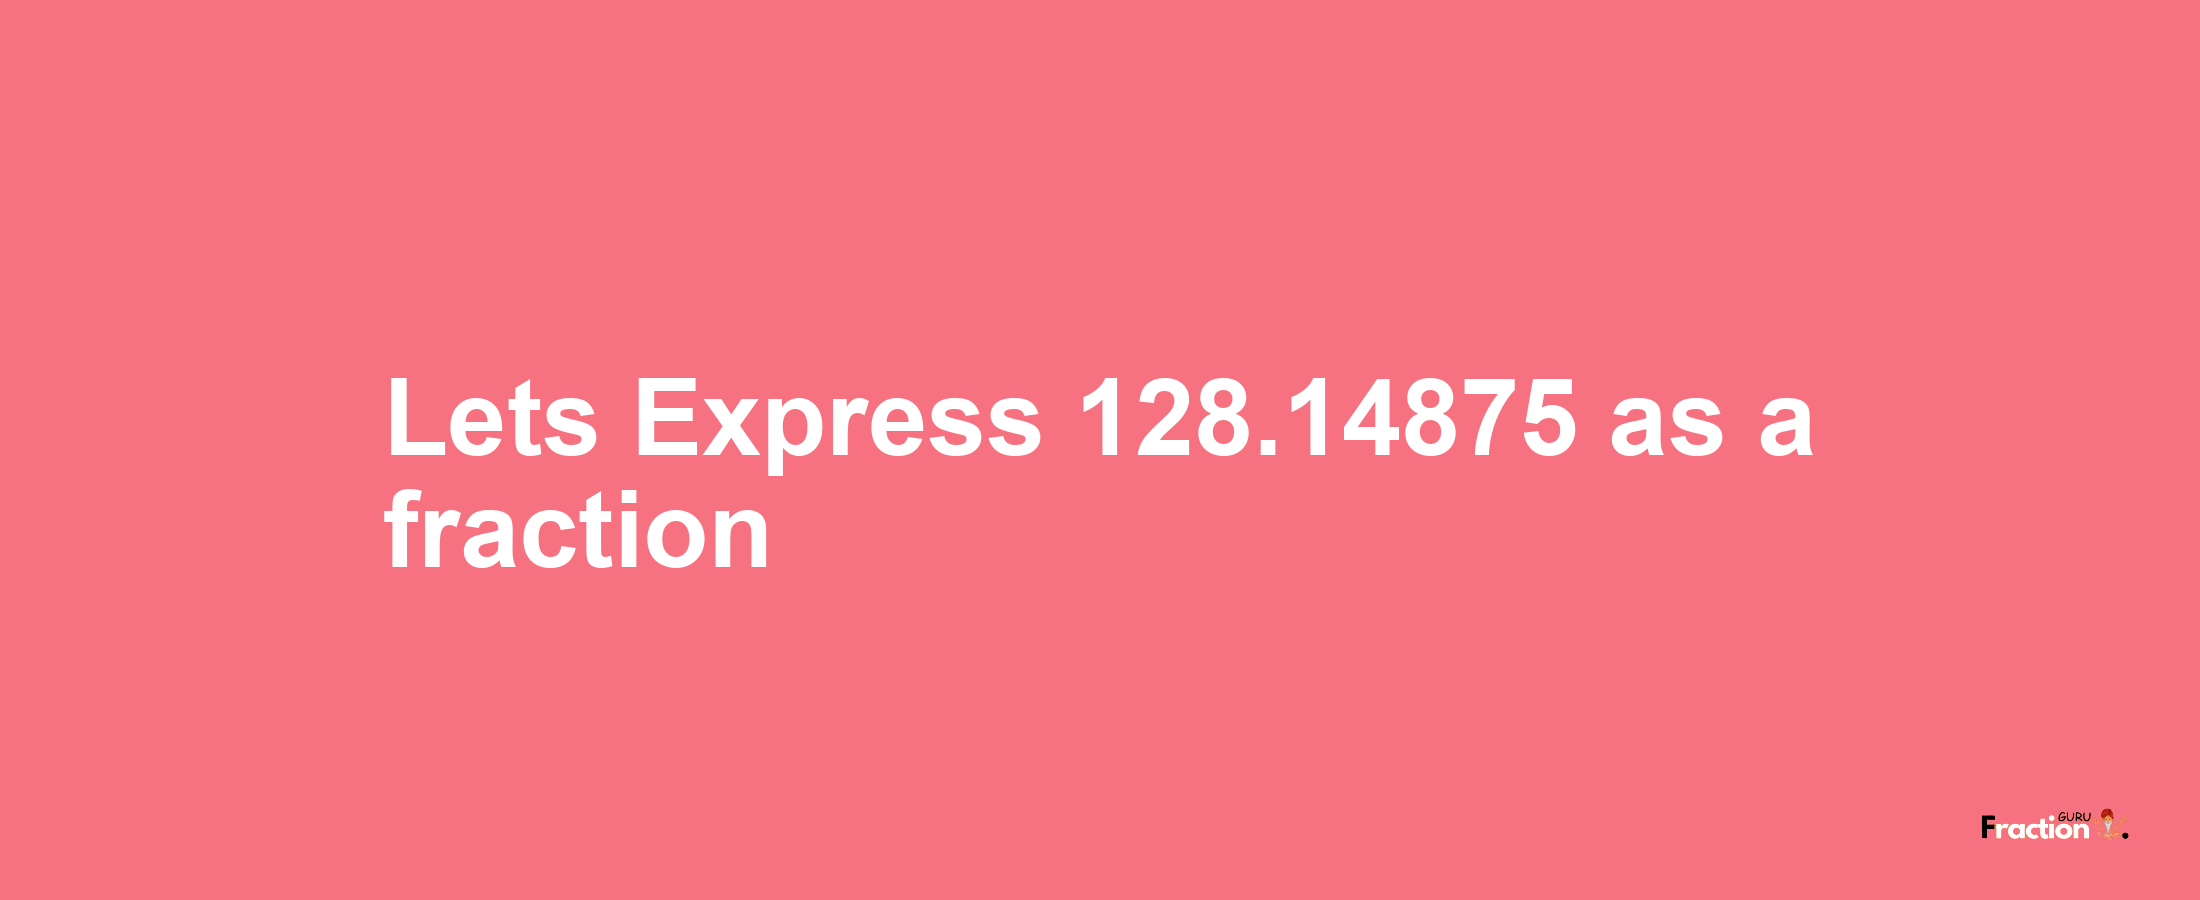 Lets Express 128.14875 as afraction